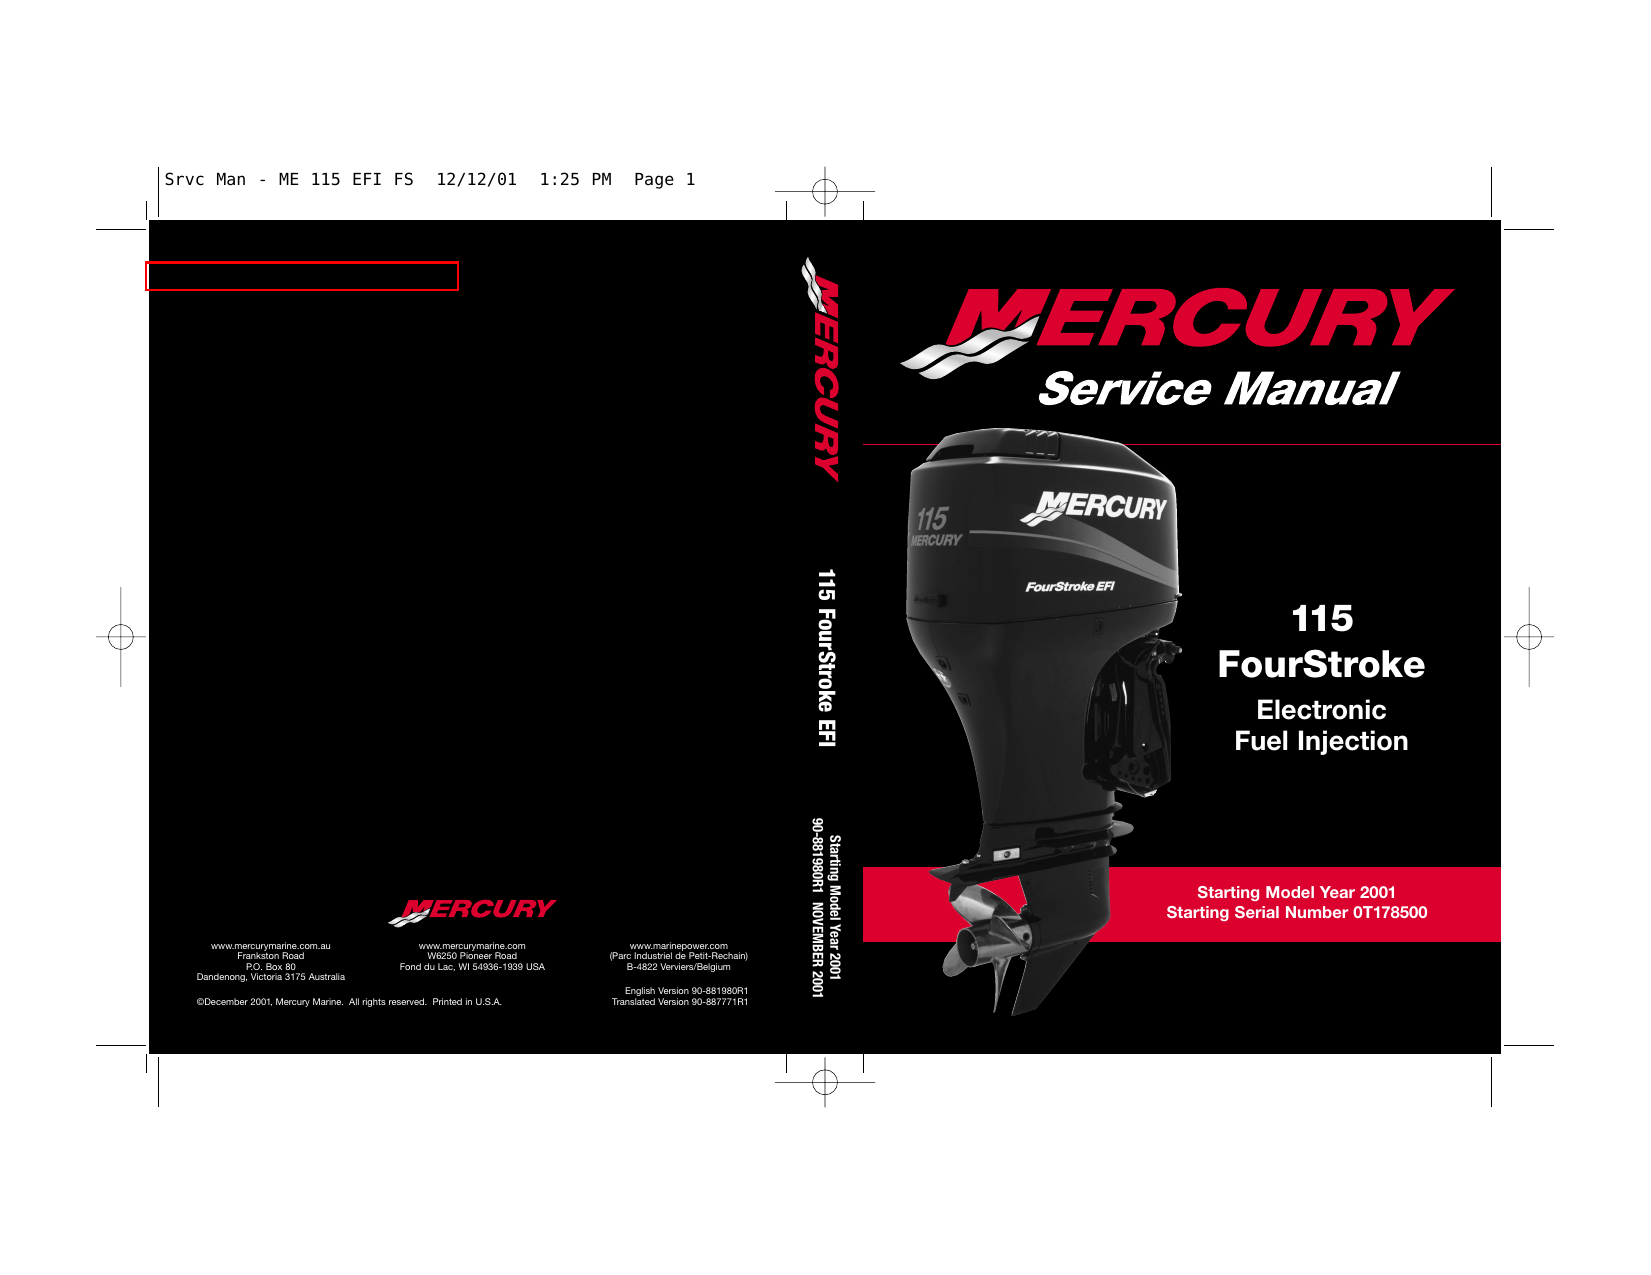 2001-2004 Mercury 115 HP, 4-stroke outboard motor manual Preview image 6